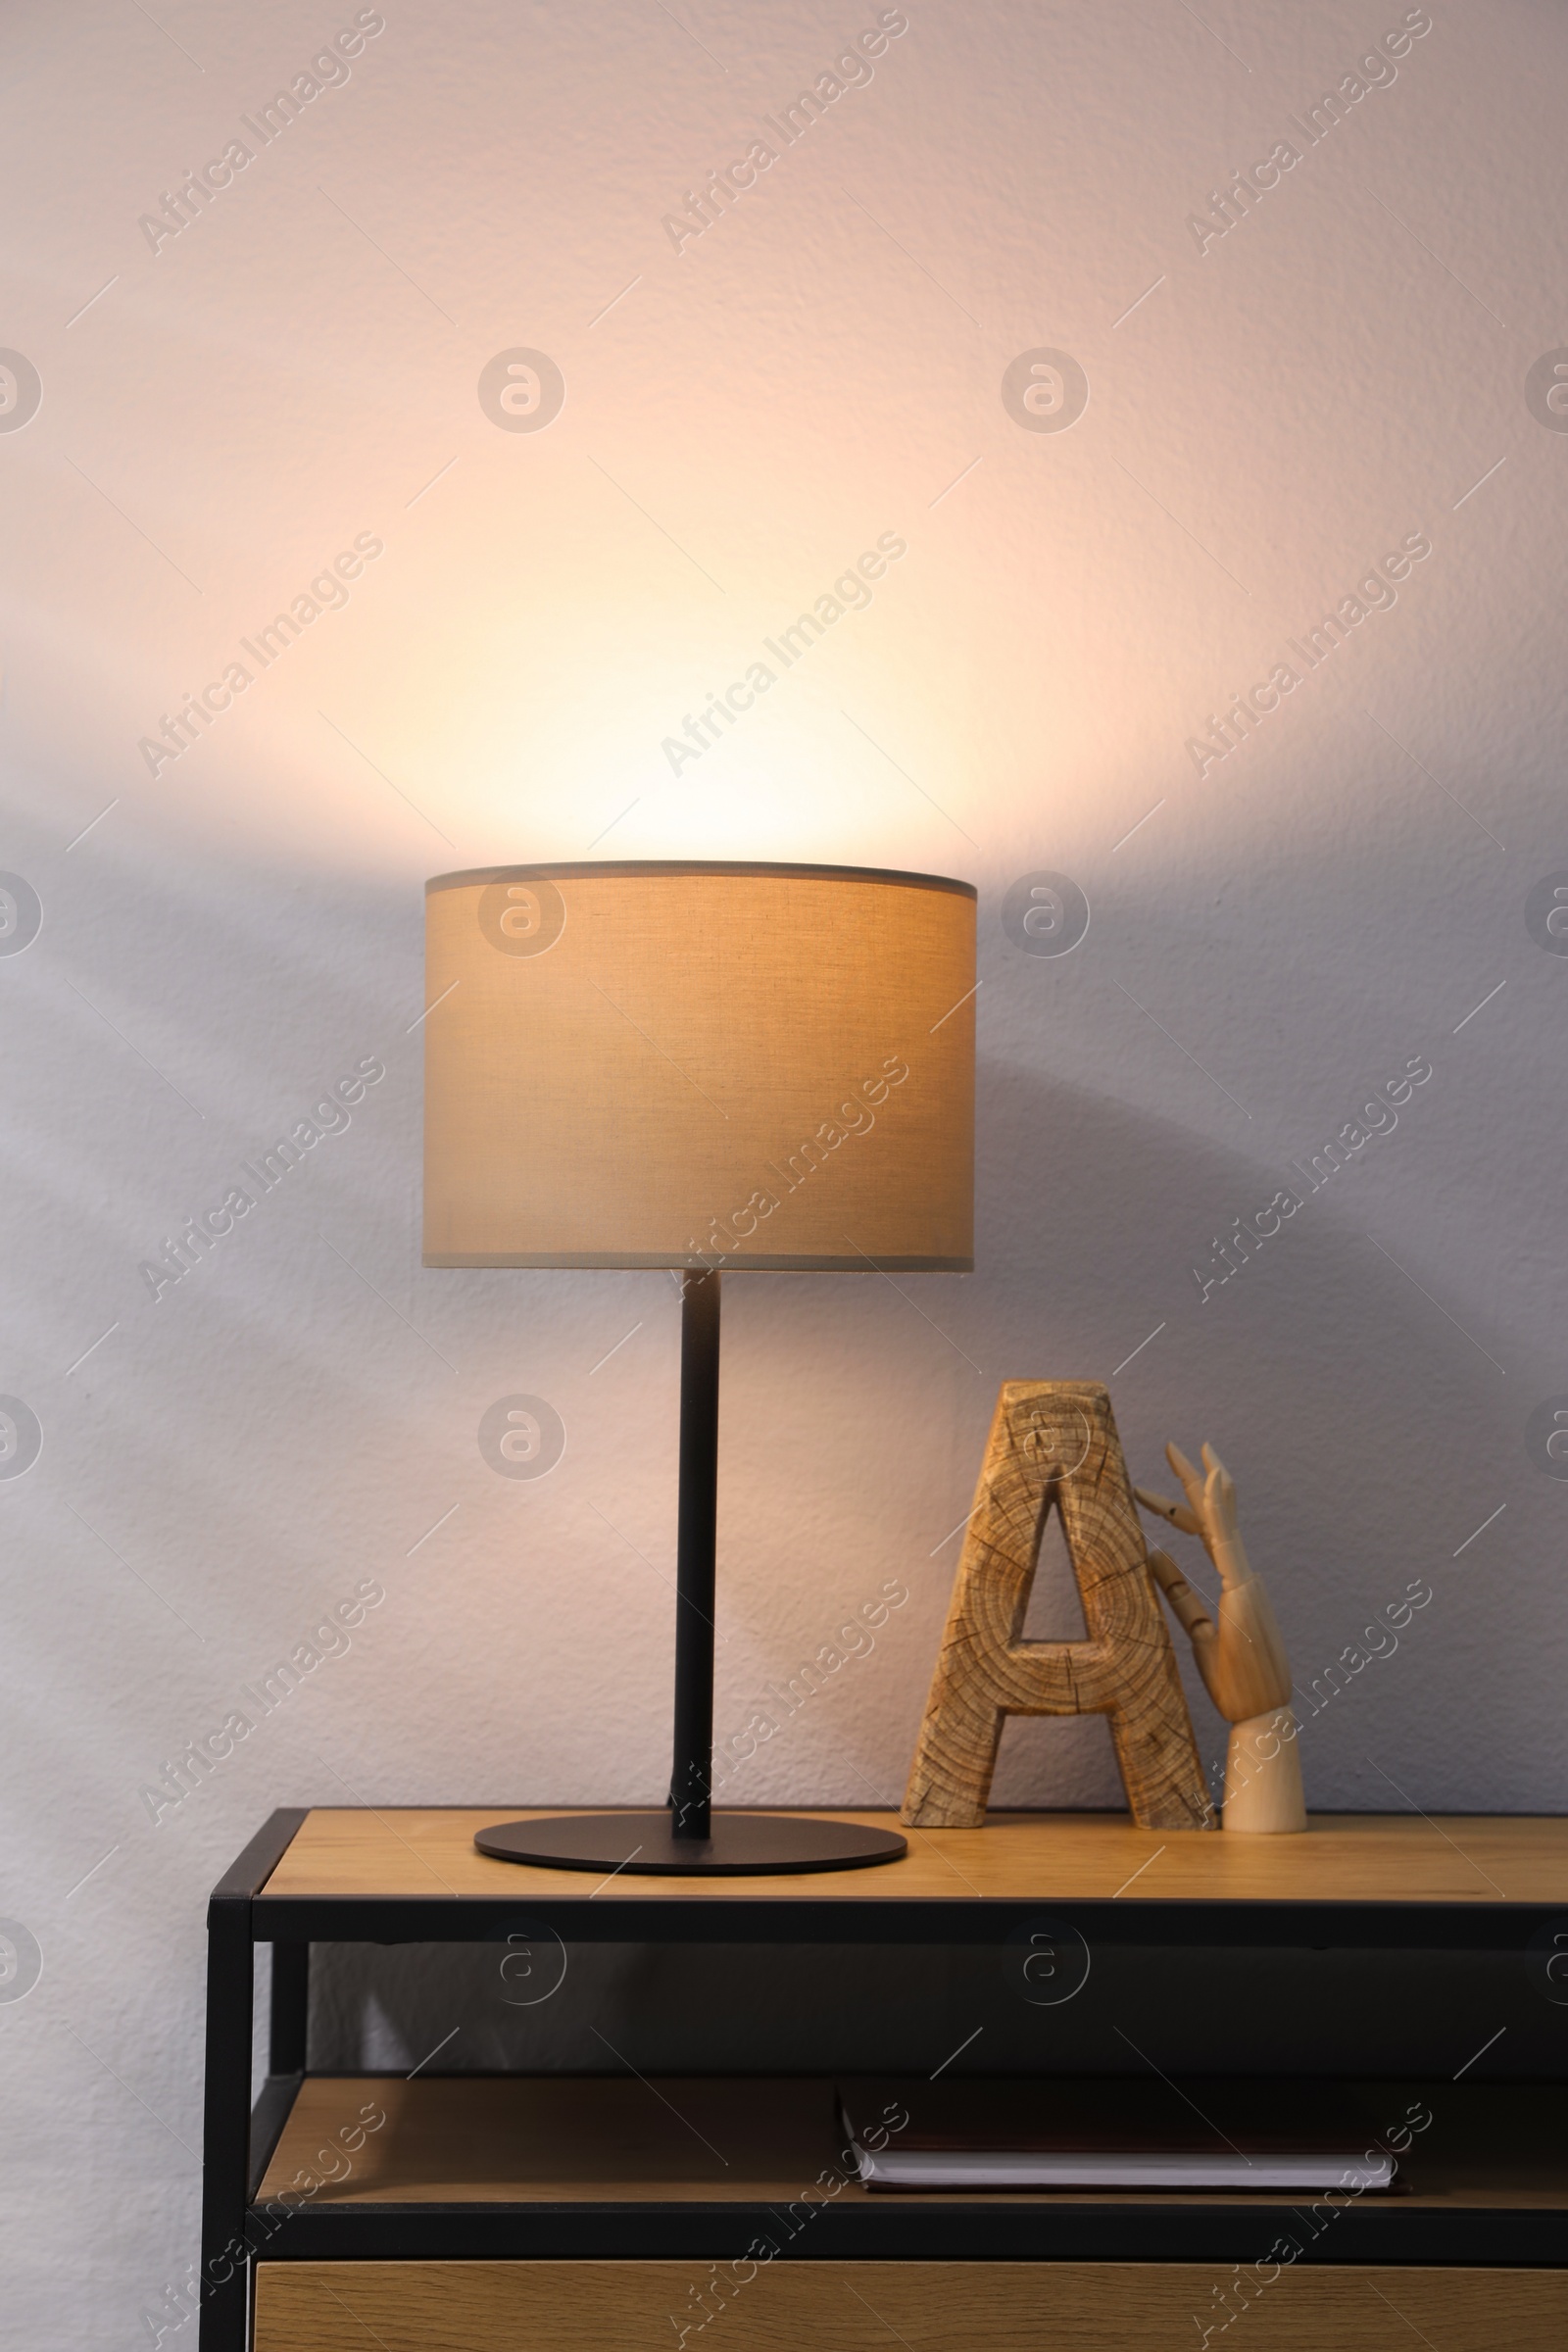 Photo of Stylish lamp and decor on wooden cabinet indoors. Interior design